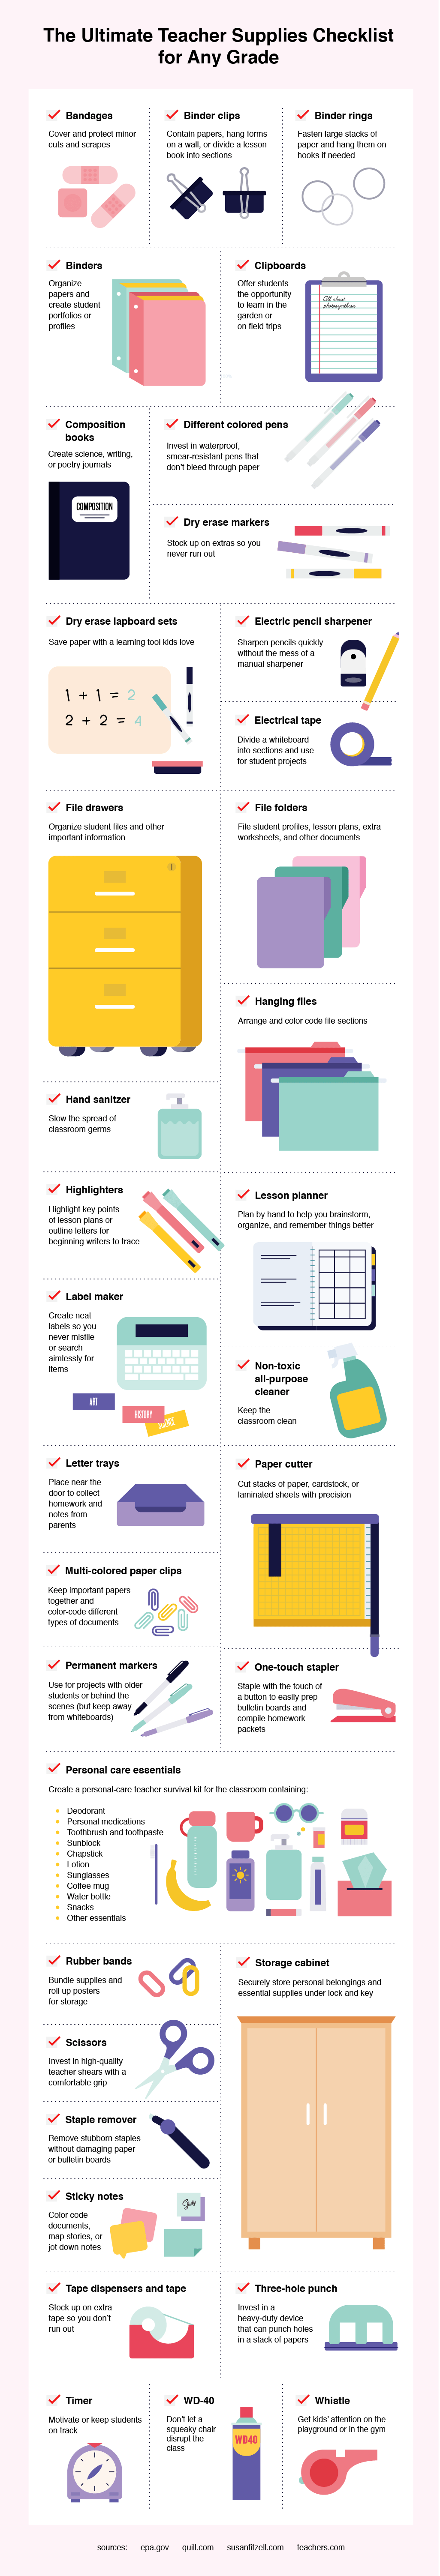 https://www.quill.com/content/index/resource-center/education/beginning-the-school-year/the-ultimate-teacher-checklist-of-supplies-for-every-grade/images/the-ultimate-teacher-checklist-of-supplies-for-every-grade-001_960.png